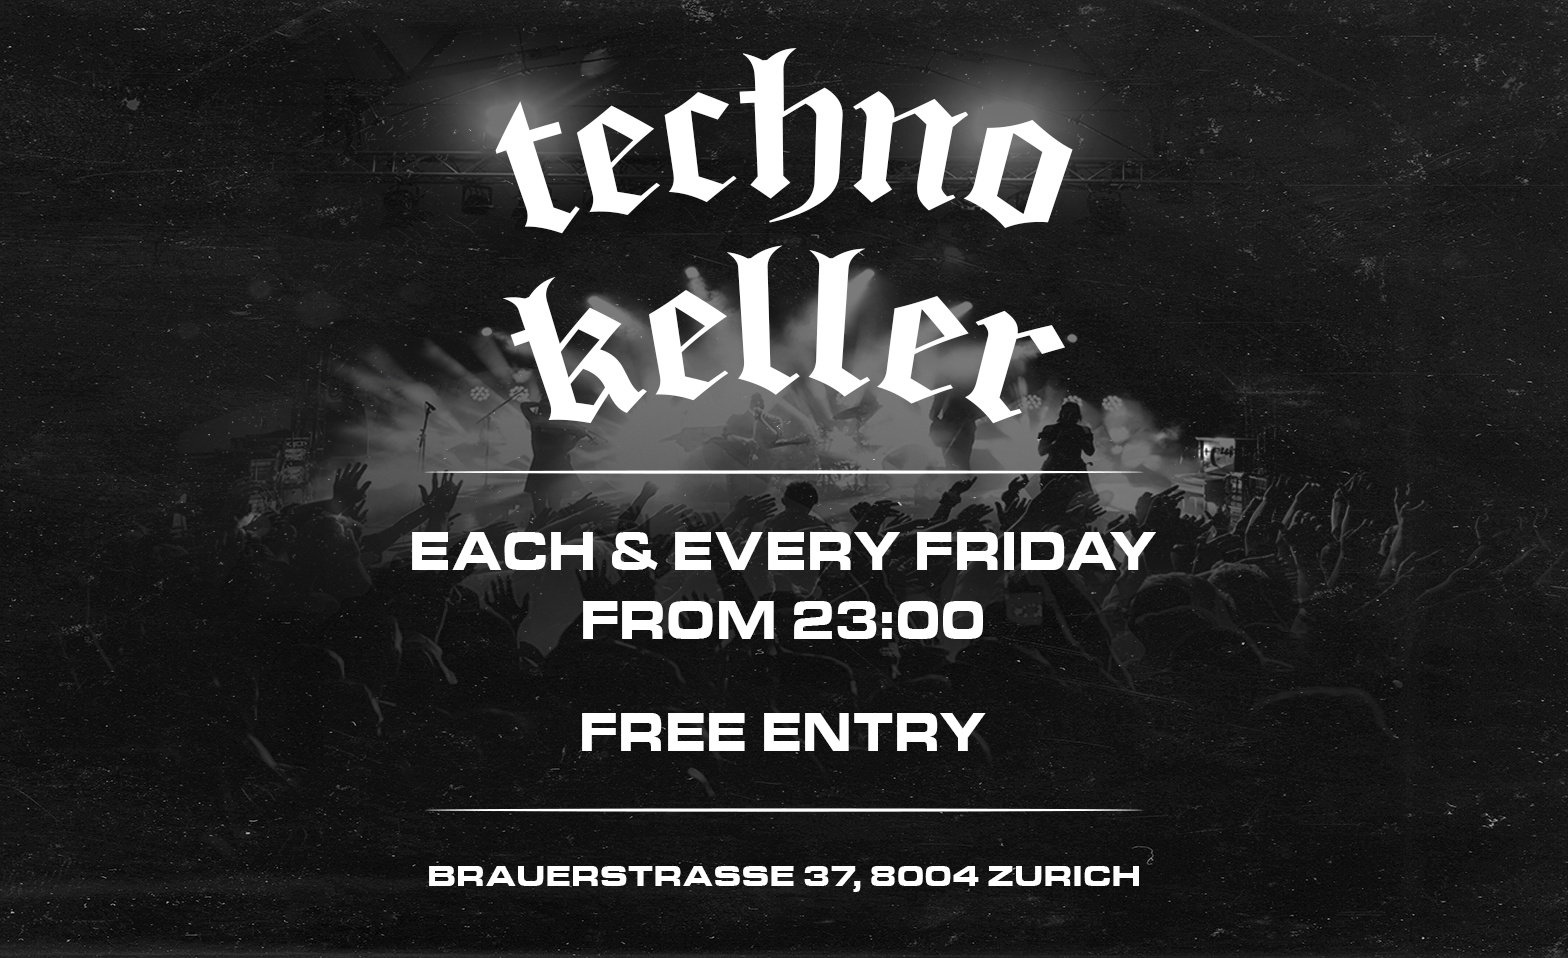 TECHNOKELLER - FREE ENTRY EACH AND EVERY FRIDAY ${singleEventLocation} Billets